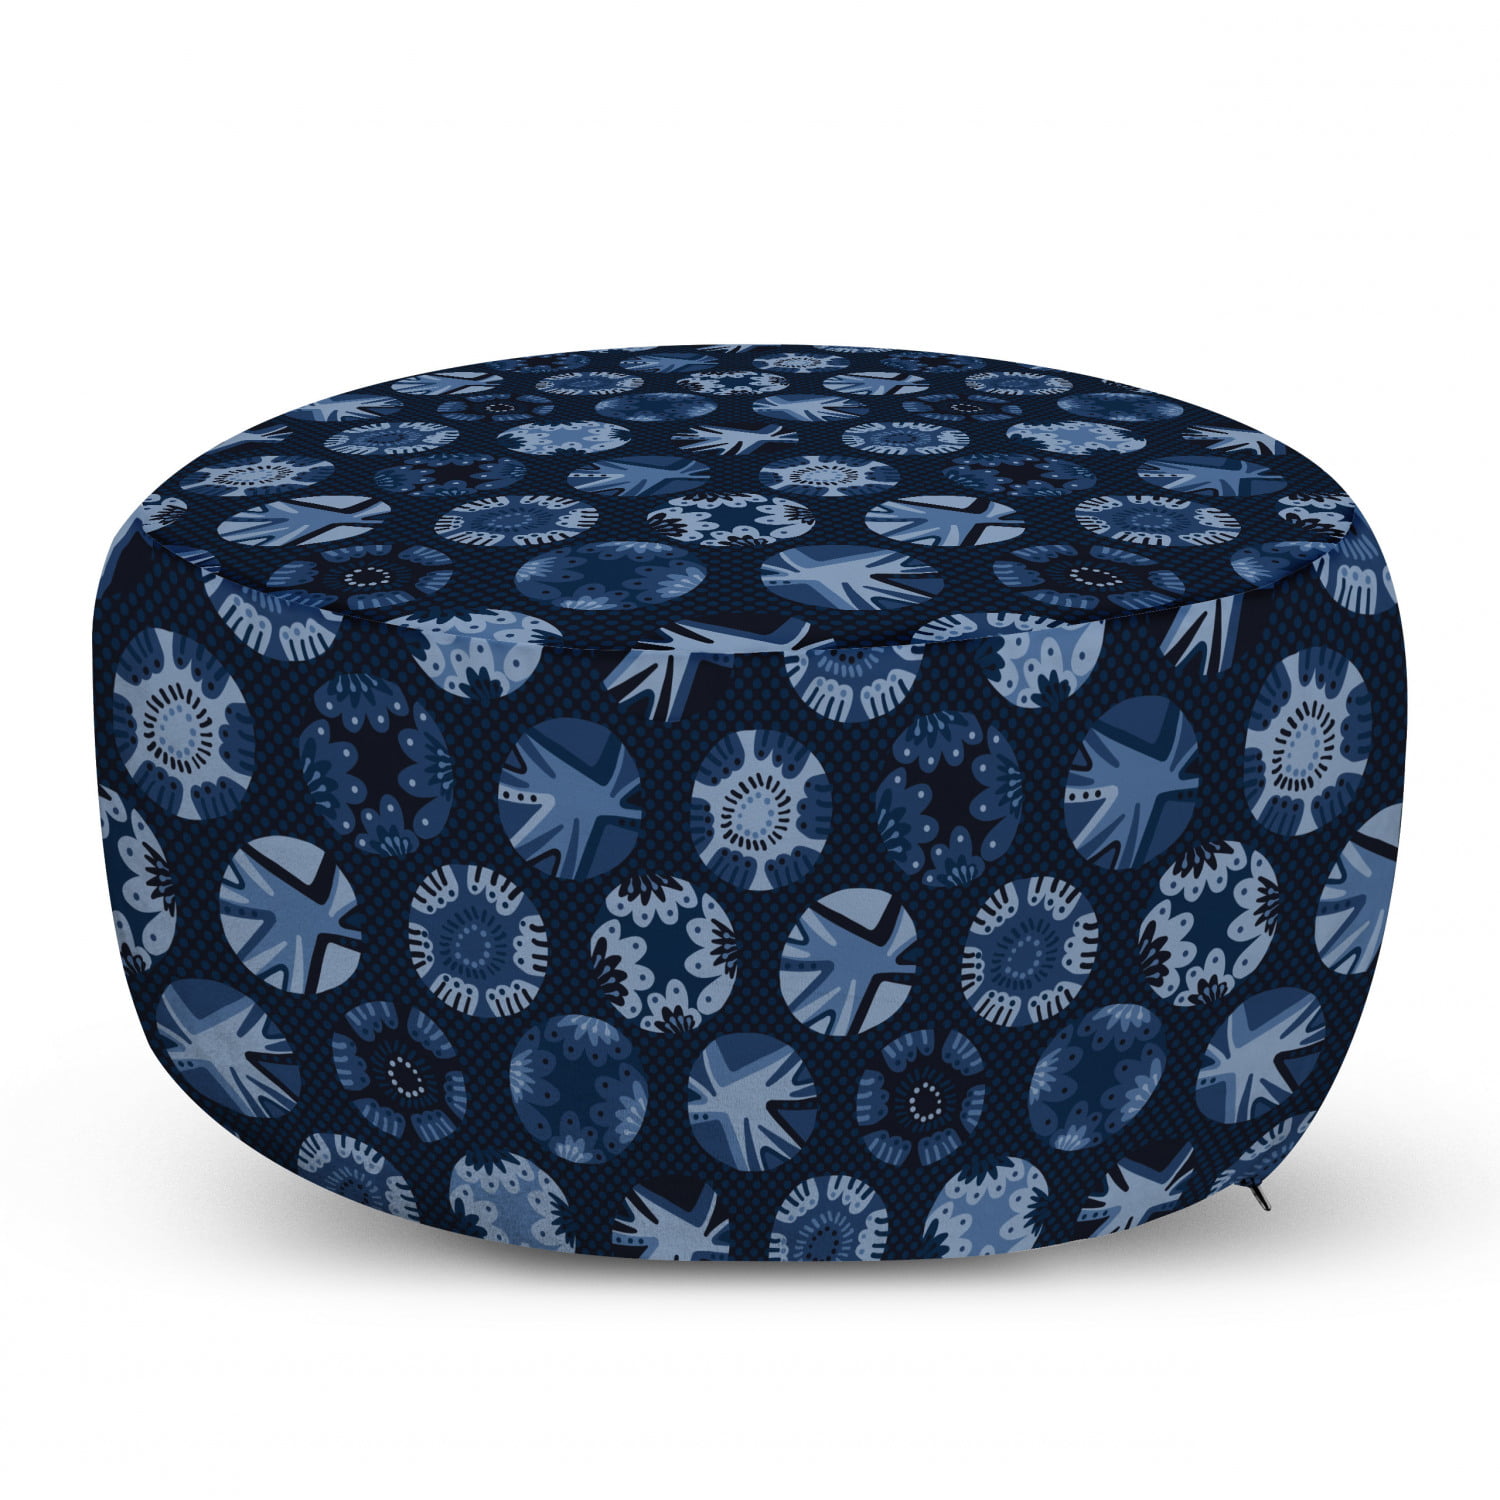 Under Desk Foot Stool for Living Room Office Ottoman with Cover 25 Ambesonne European Rectangle Pouf Roman Tile and Mosaic Design with Famous Eastern Inspired Image Print Blue Yellow 